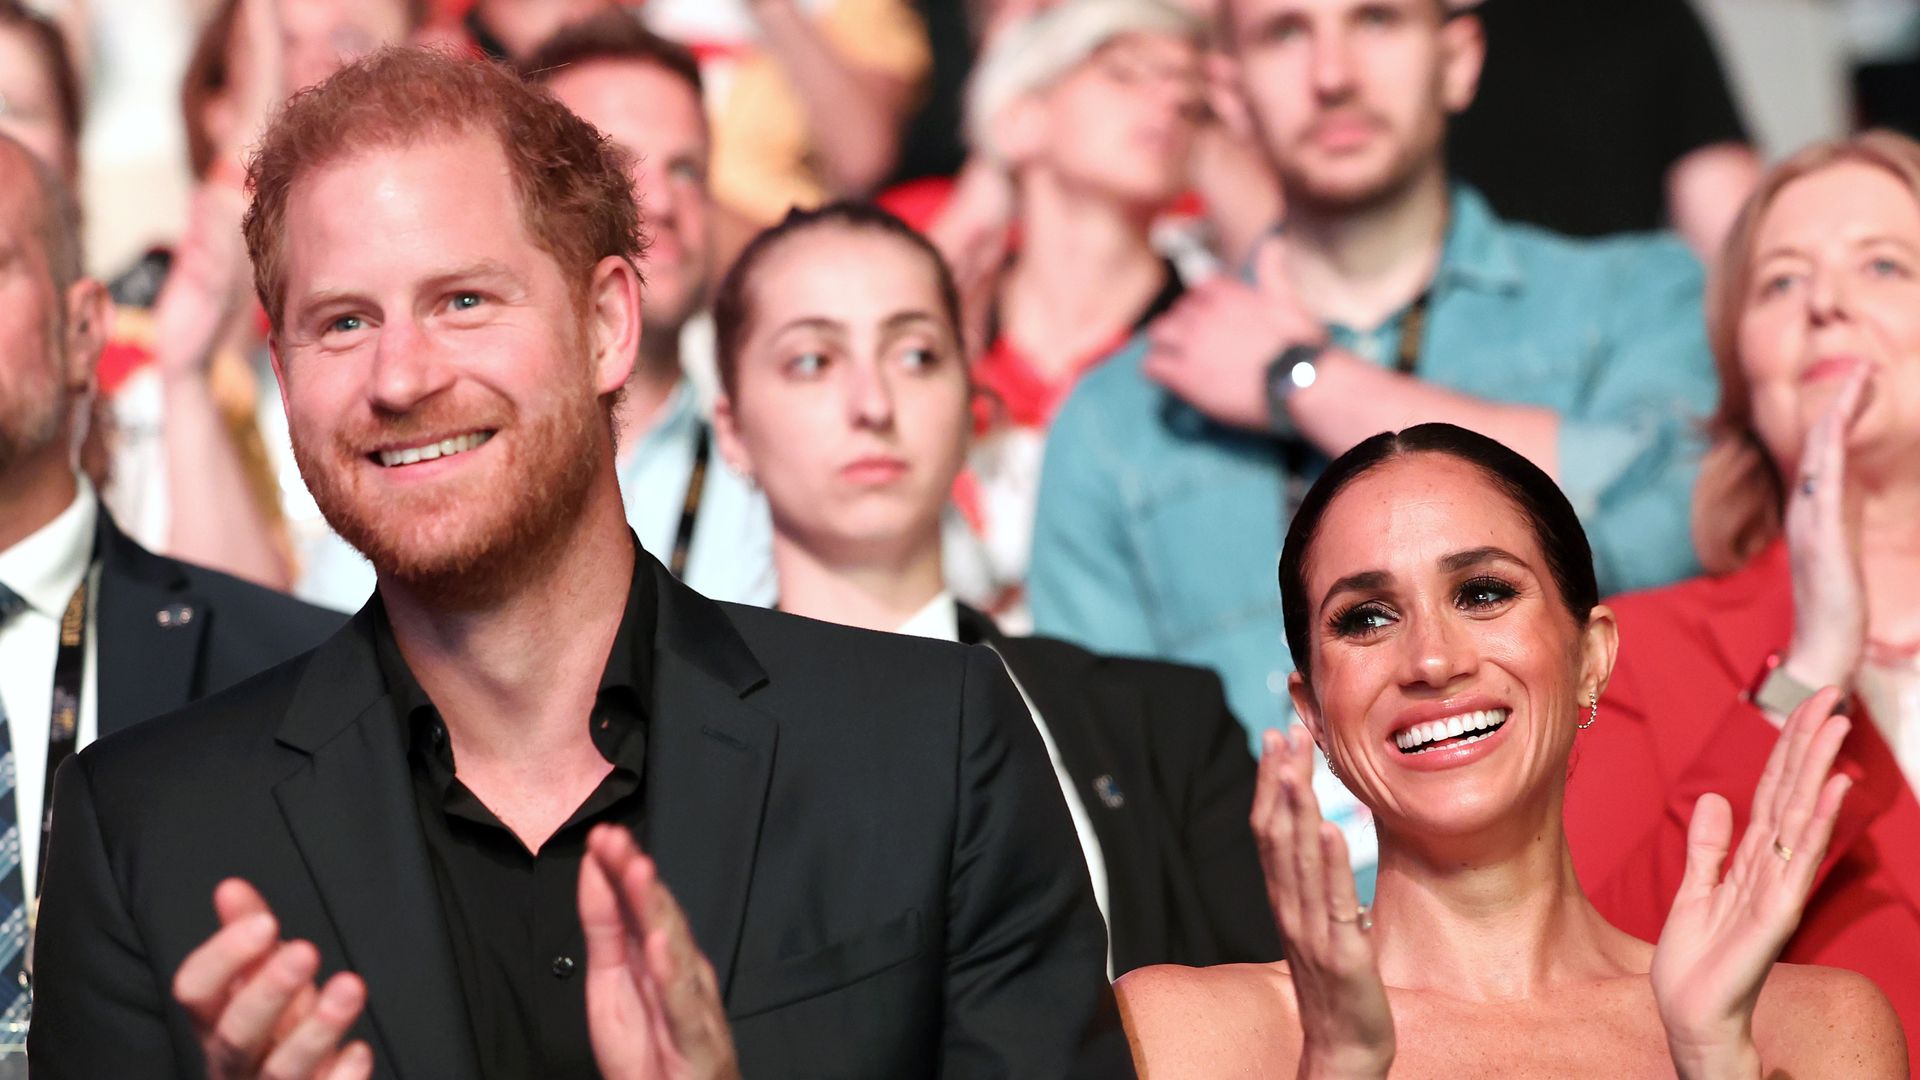 Big celebration for Prince Harry and Meghan Markle ahead of missing society wedding of the year